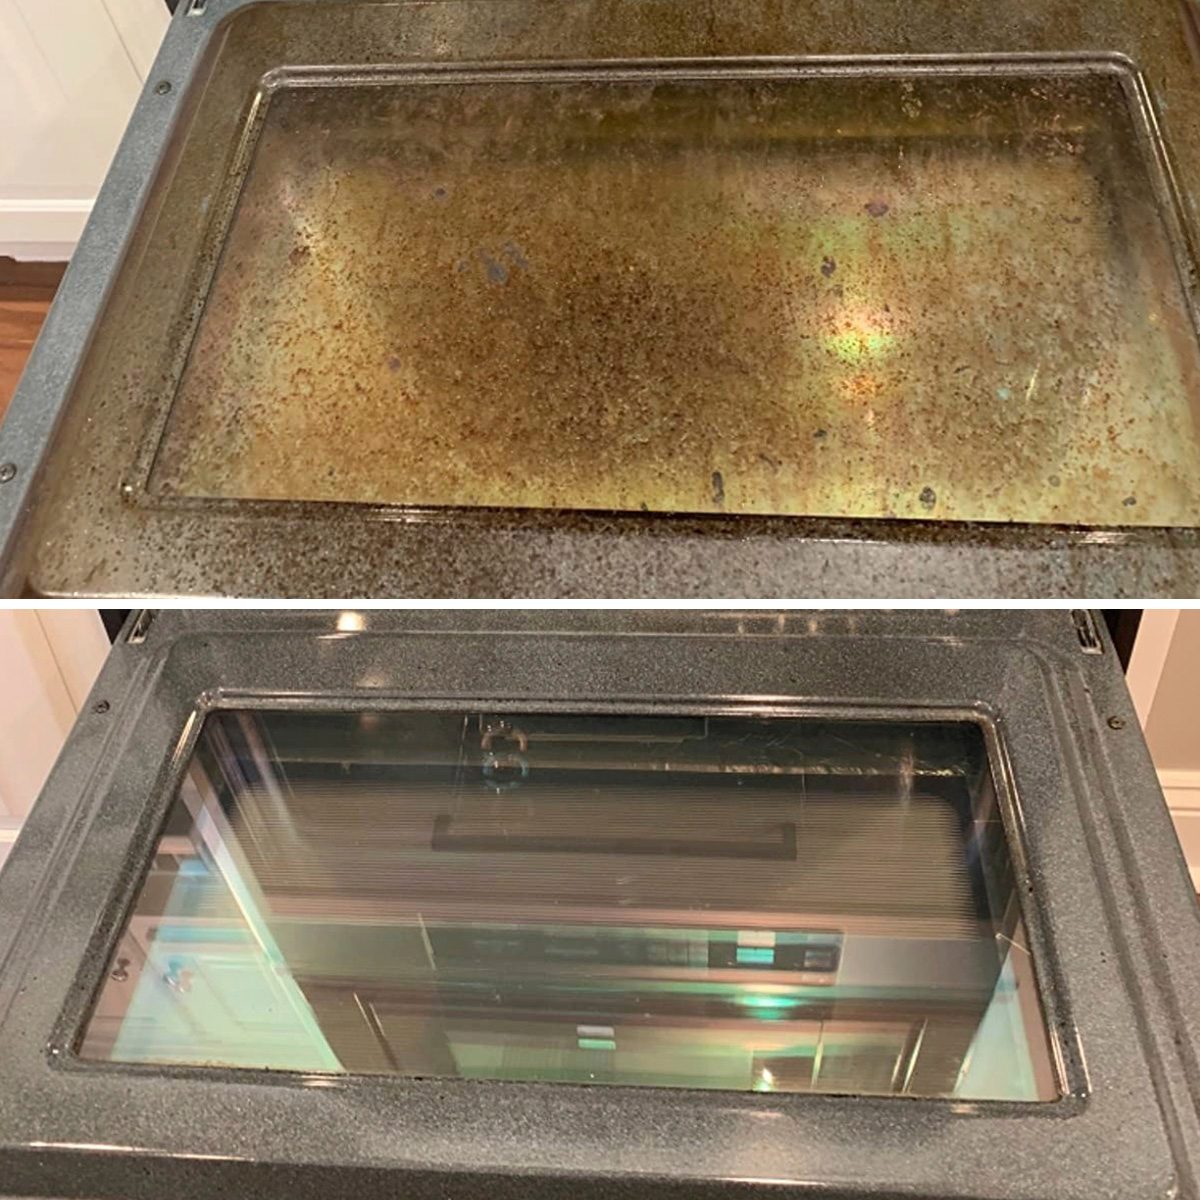 Oven door cleaning made easy with some ✨PINK POWER✨ to get the